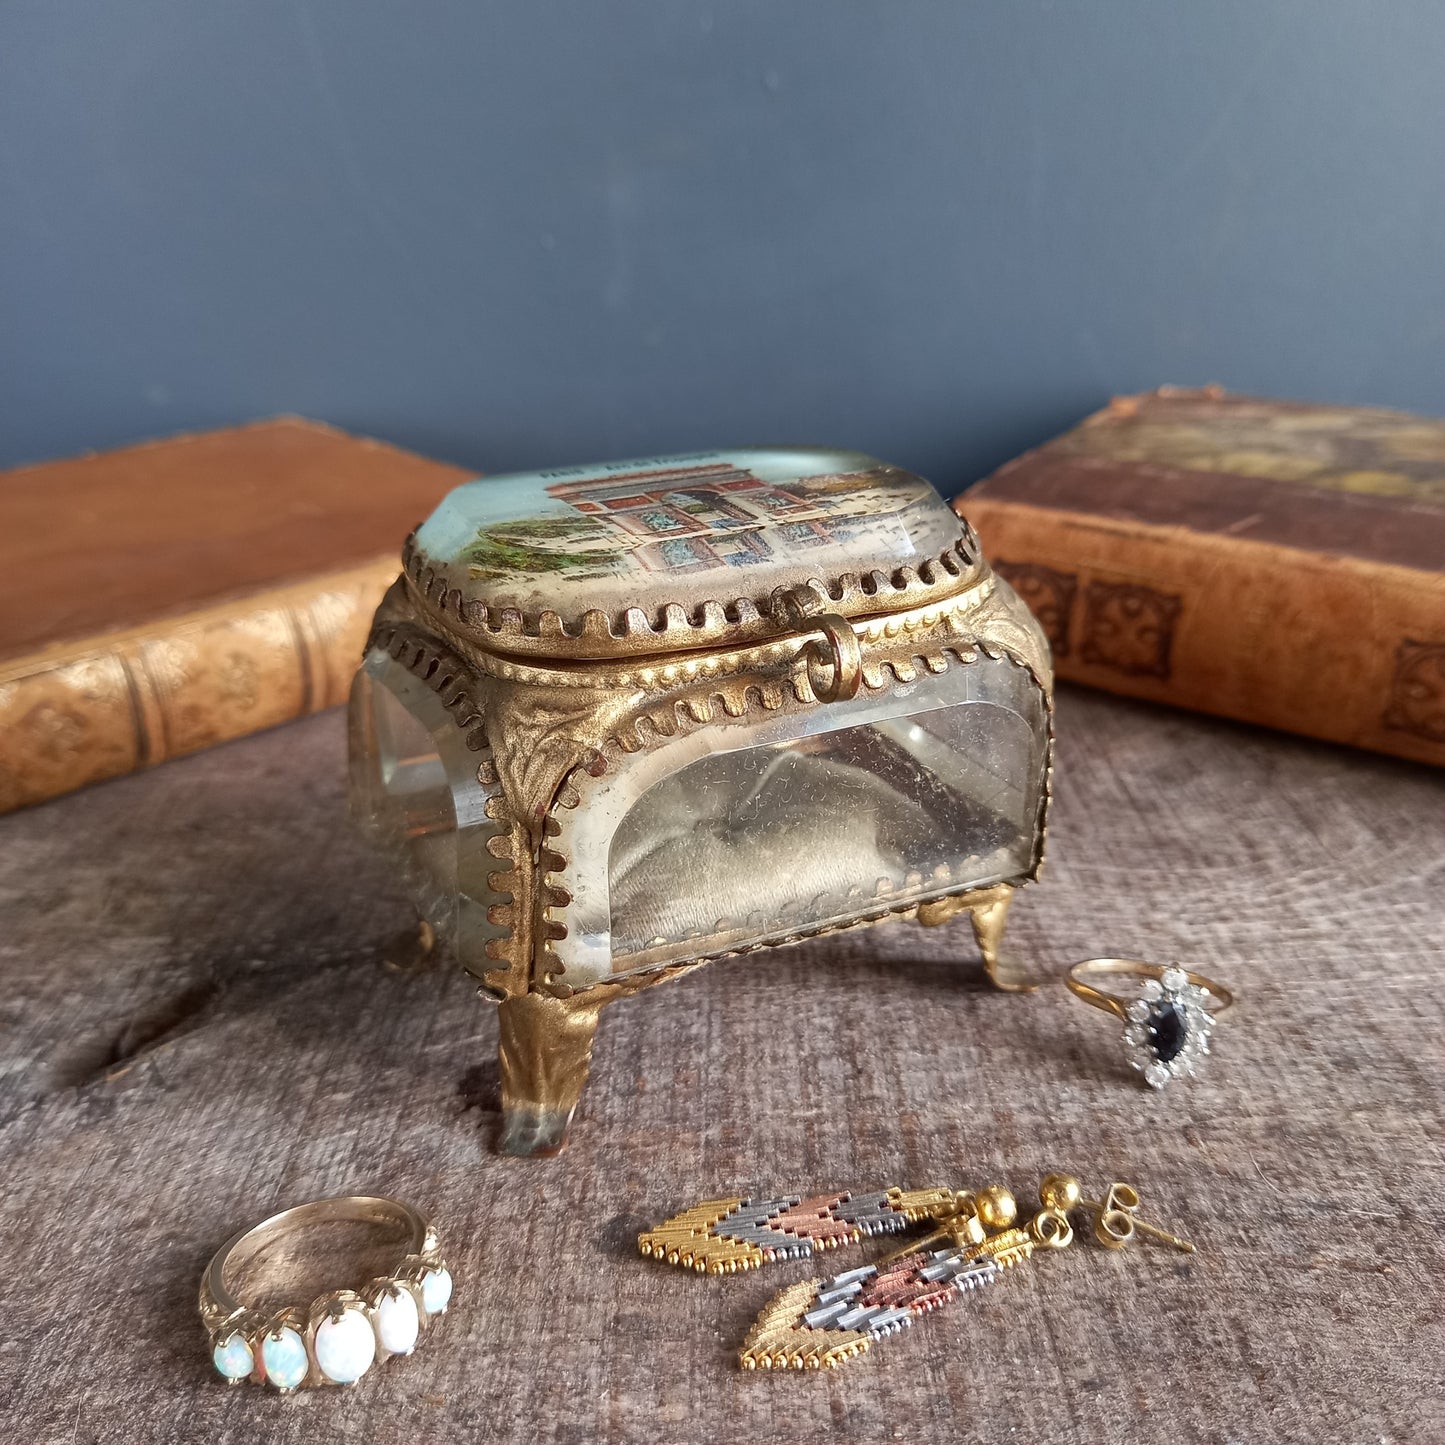 French antique jewellery or trinket box.